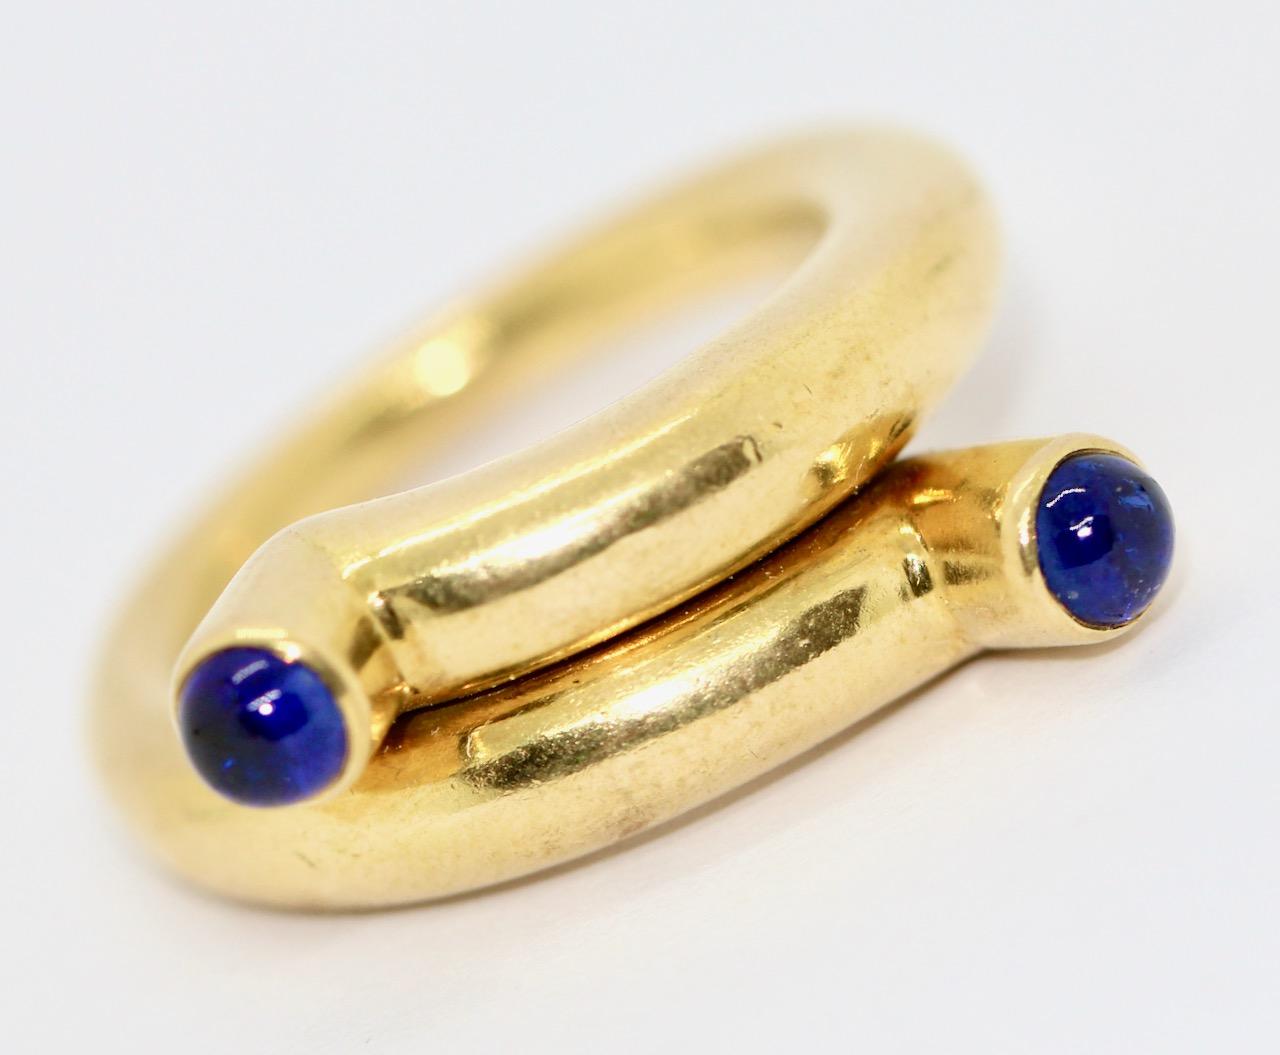 Designer ring by Tiffany & Co, Jean Schlumberger, 18k gold with sapphire cabochons.

Includes certificate of authenticity.